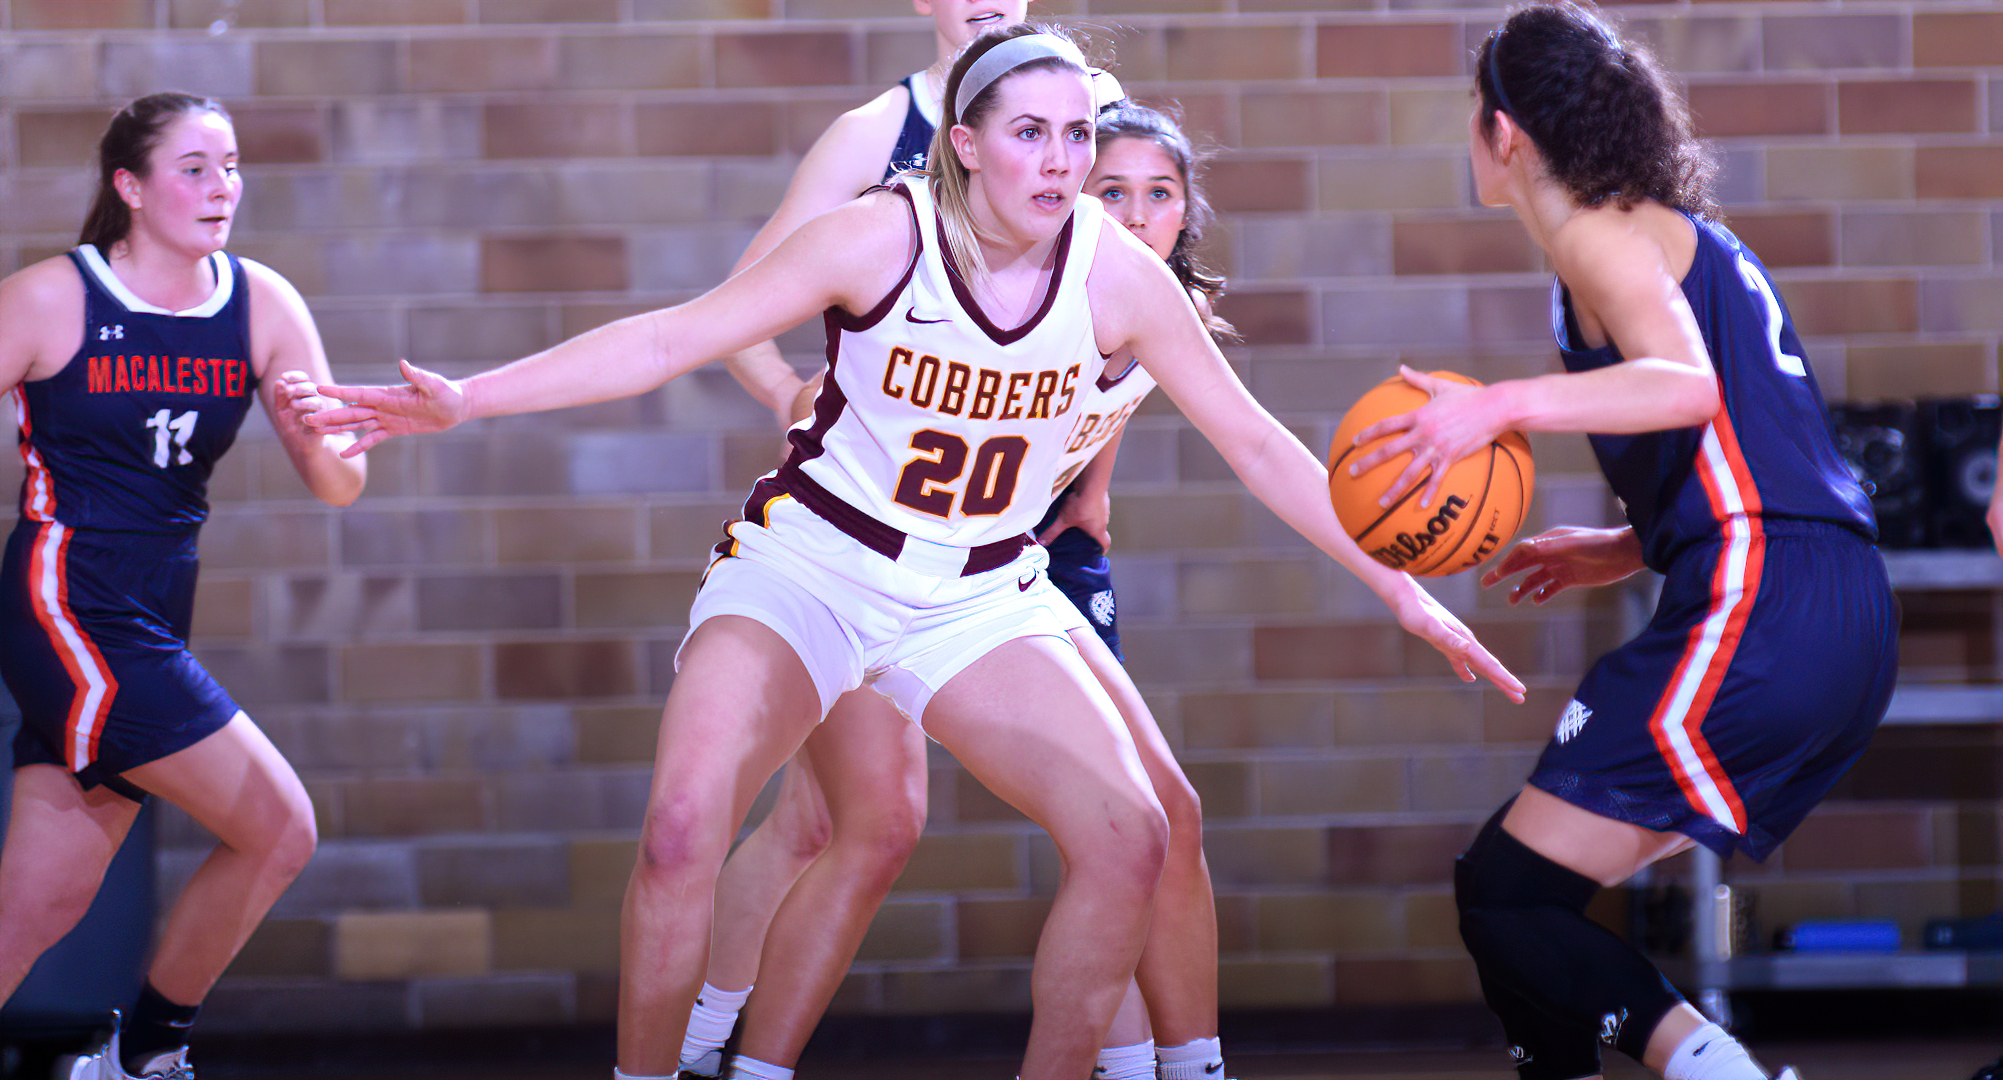 Junior Emily Beseman scored a team-high 14 points to help Concordia outscore Macalester 34-19 in the second en route to a 67-58 road win.